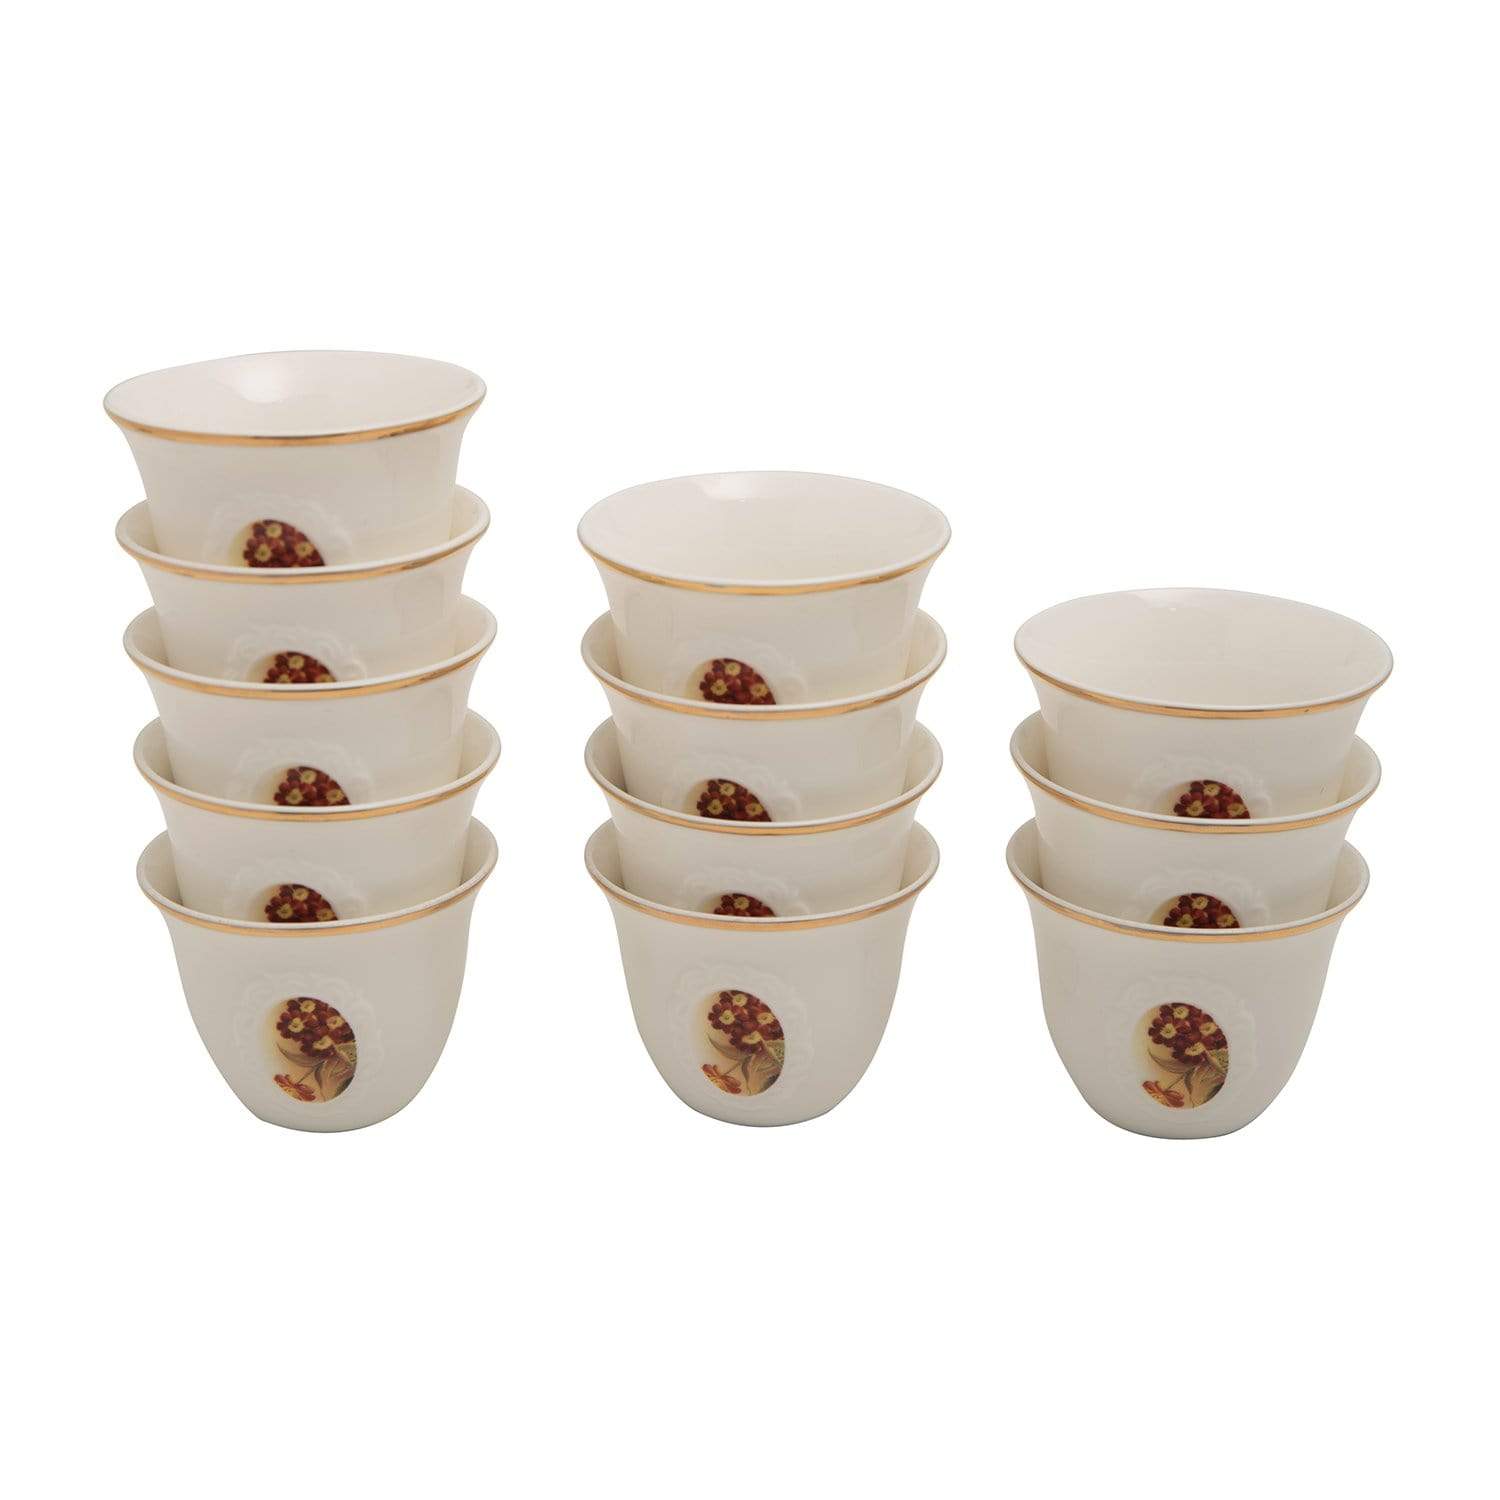 BANBERRY PORCELAIN 12PC CAWA CUPS BC GOLD LINE - LV088G